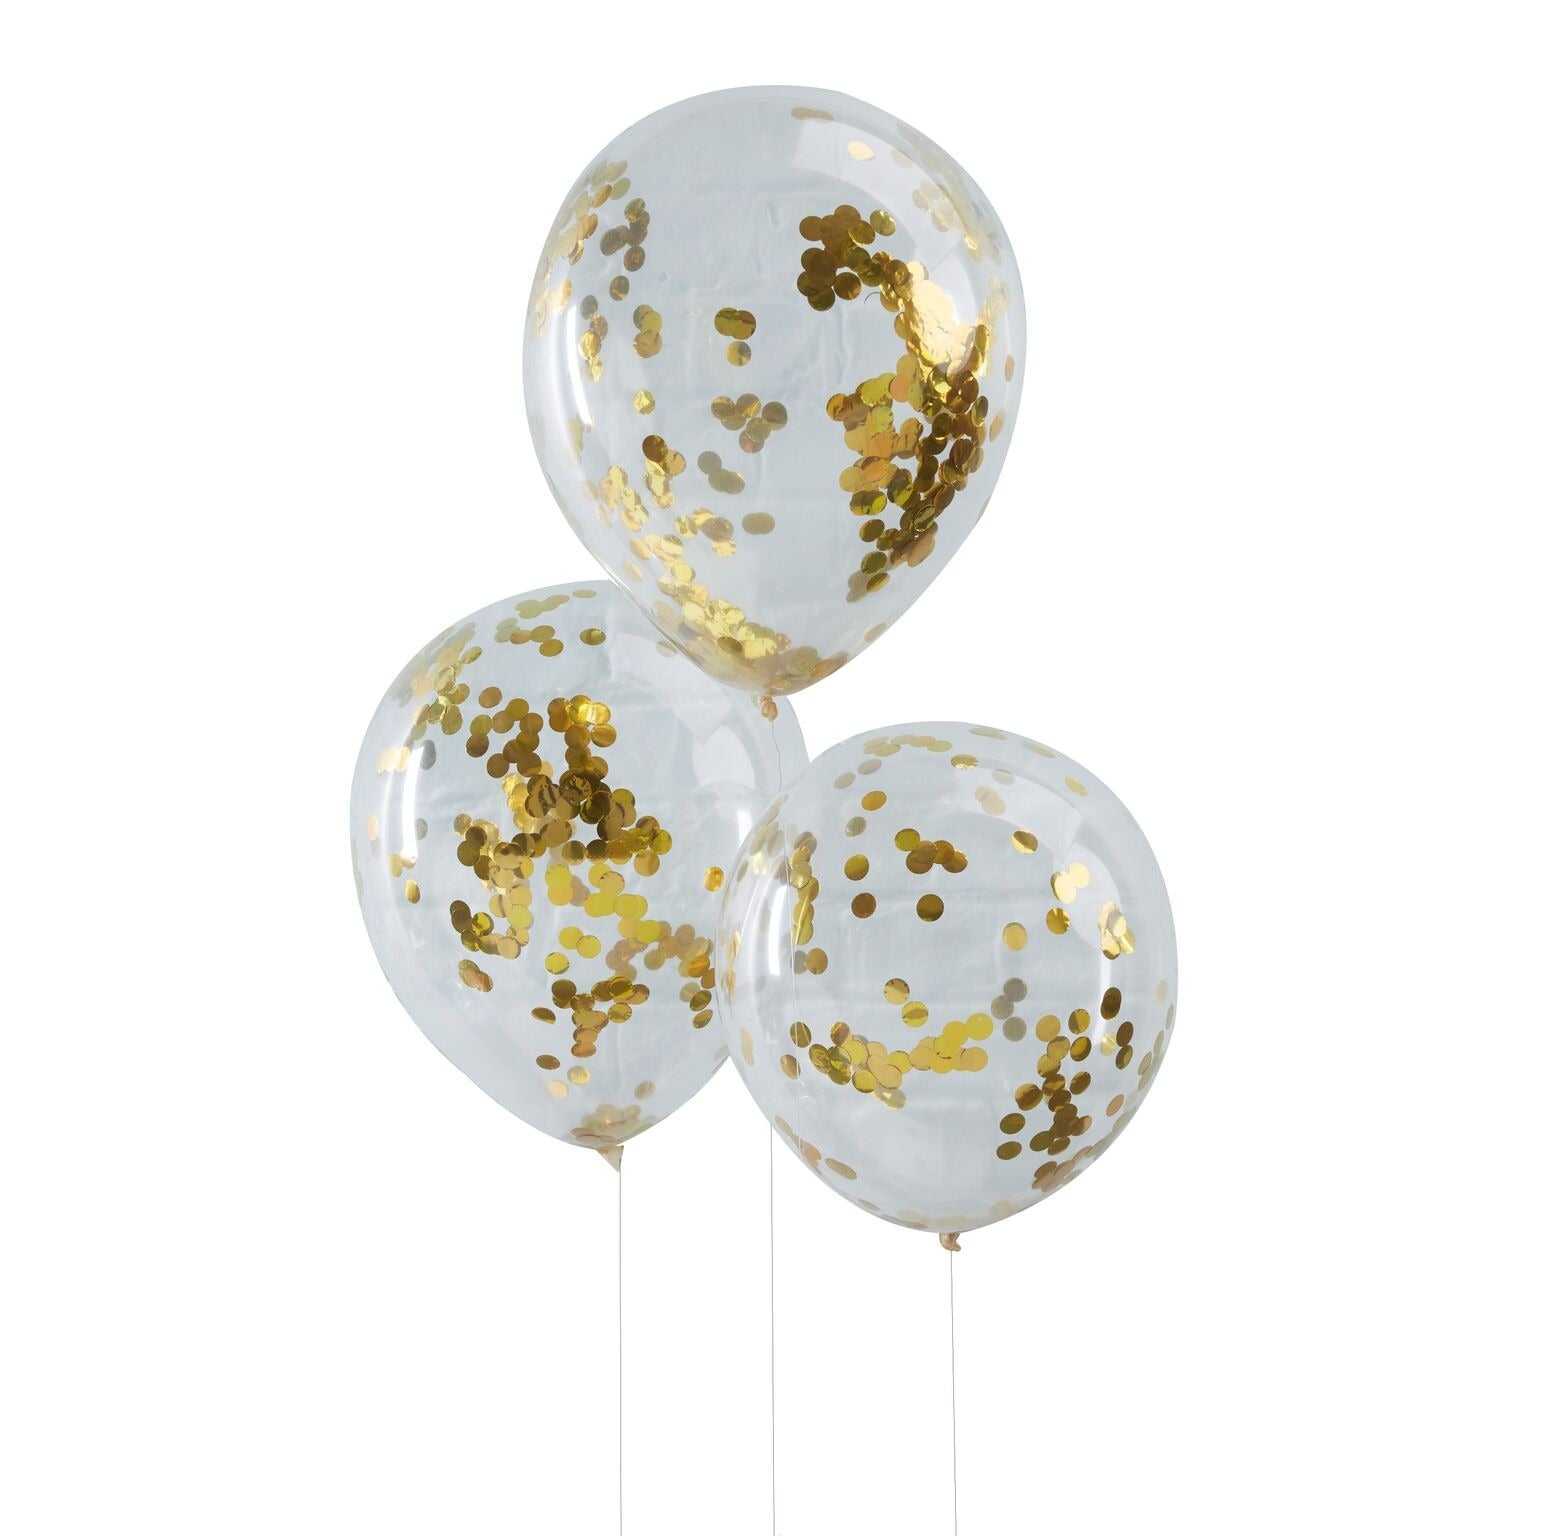 View Gold Confetti Filled Balloons information